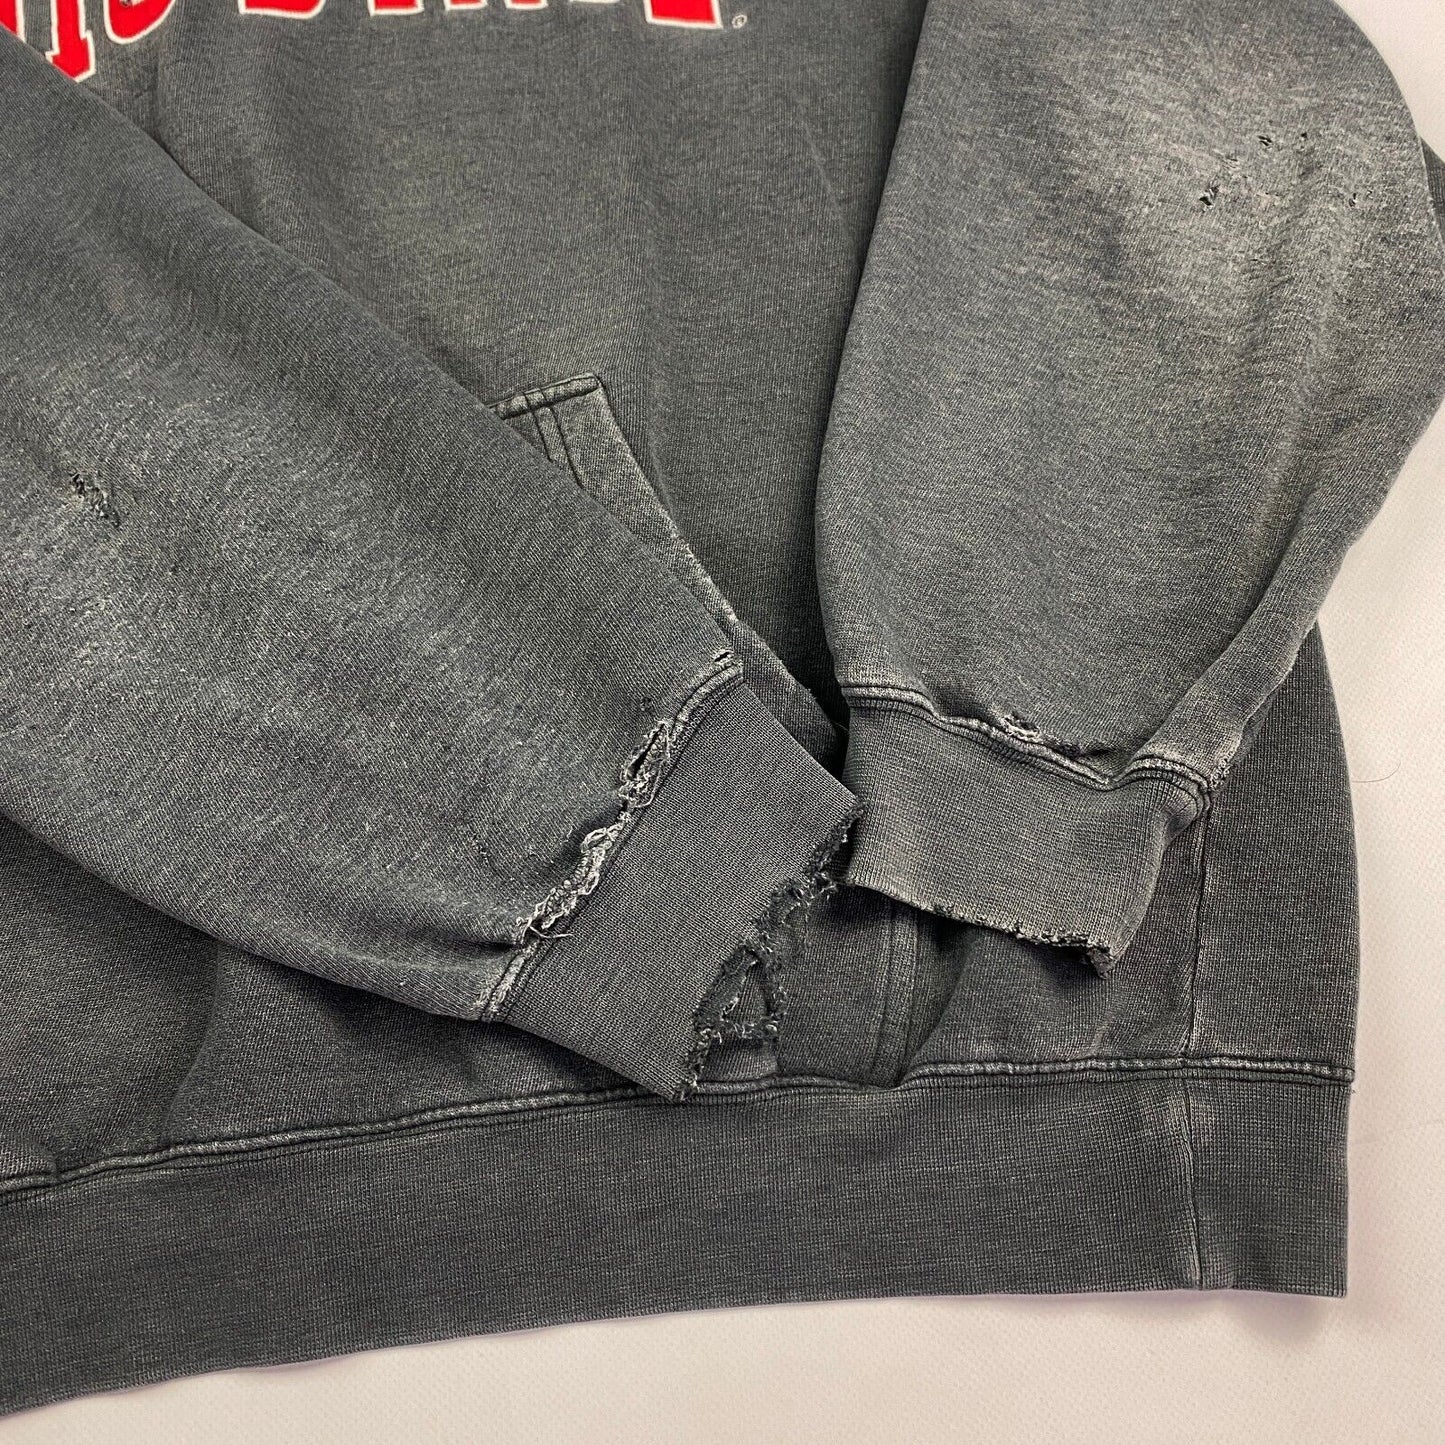 VINTAGE Ohio State Faded Charcoal Distressed Hoodie Sweater sz XL Men